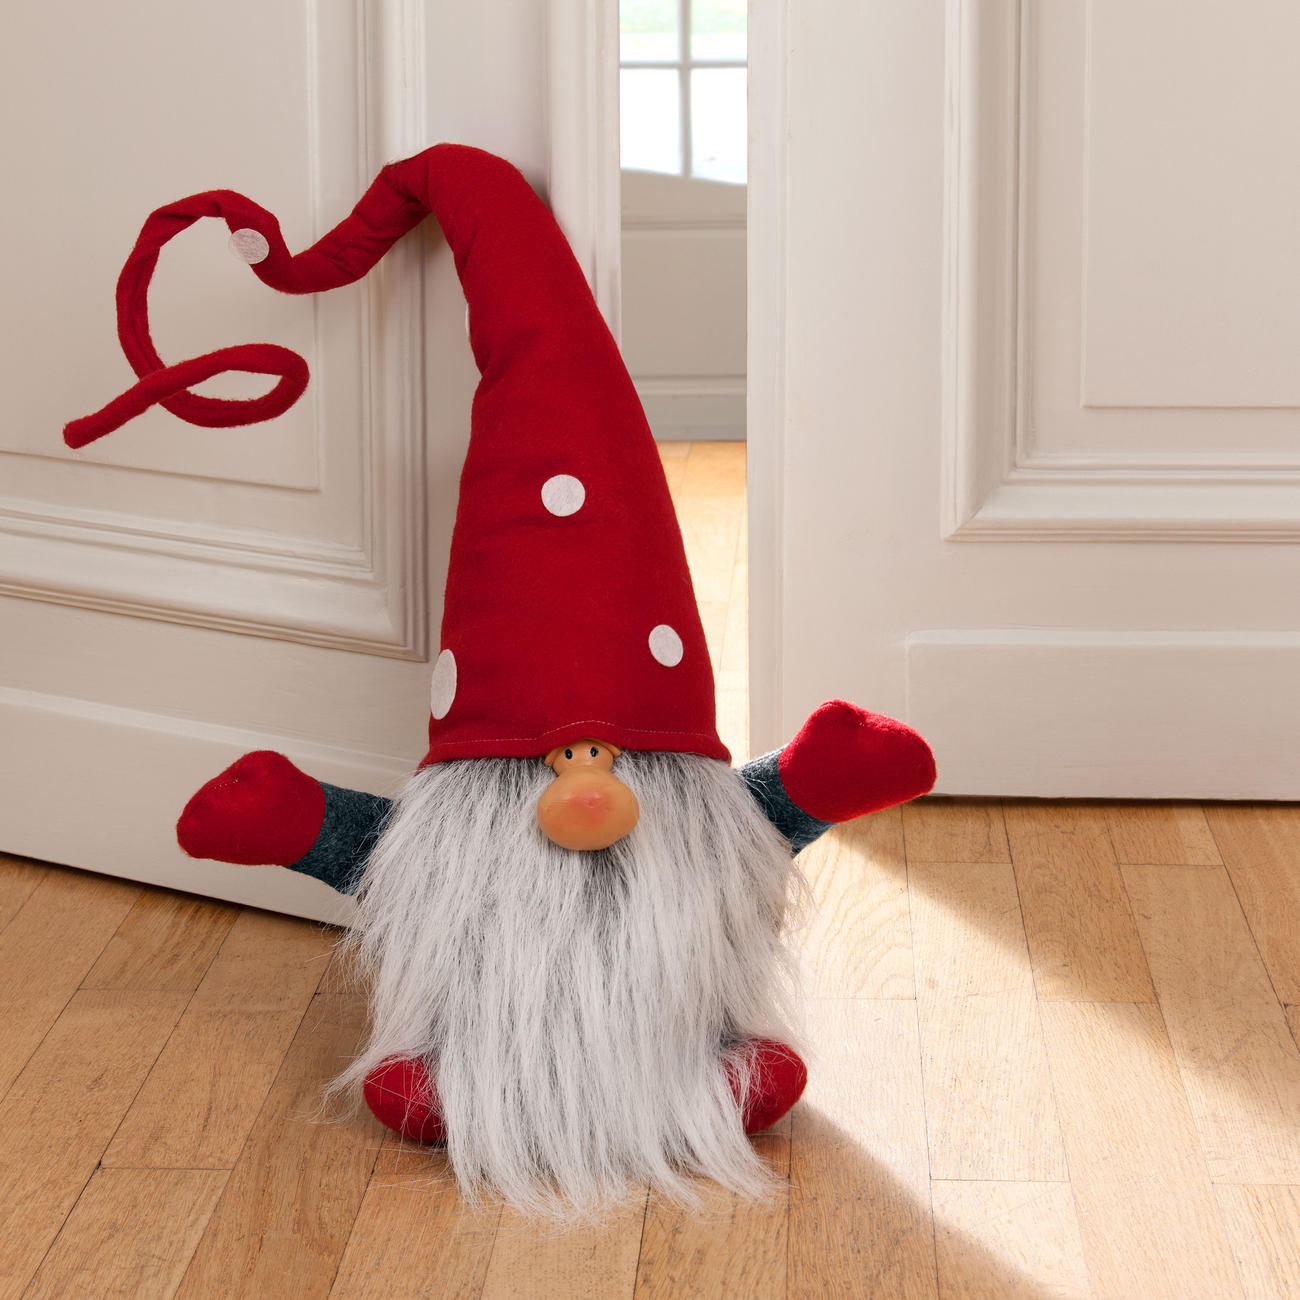 Download Christmas Gnome Julenisse | 3-year product guarantee